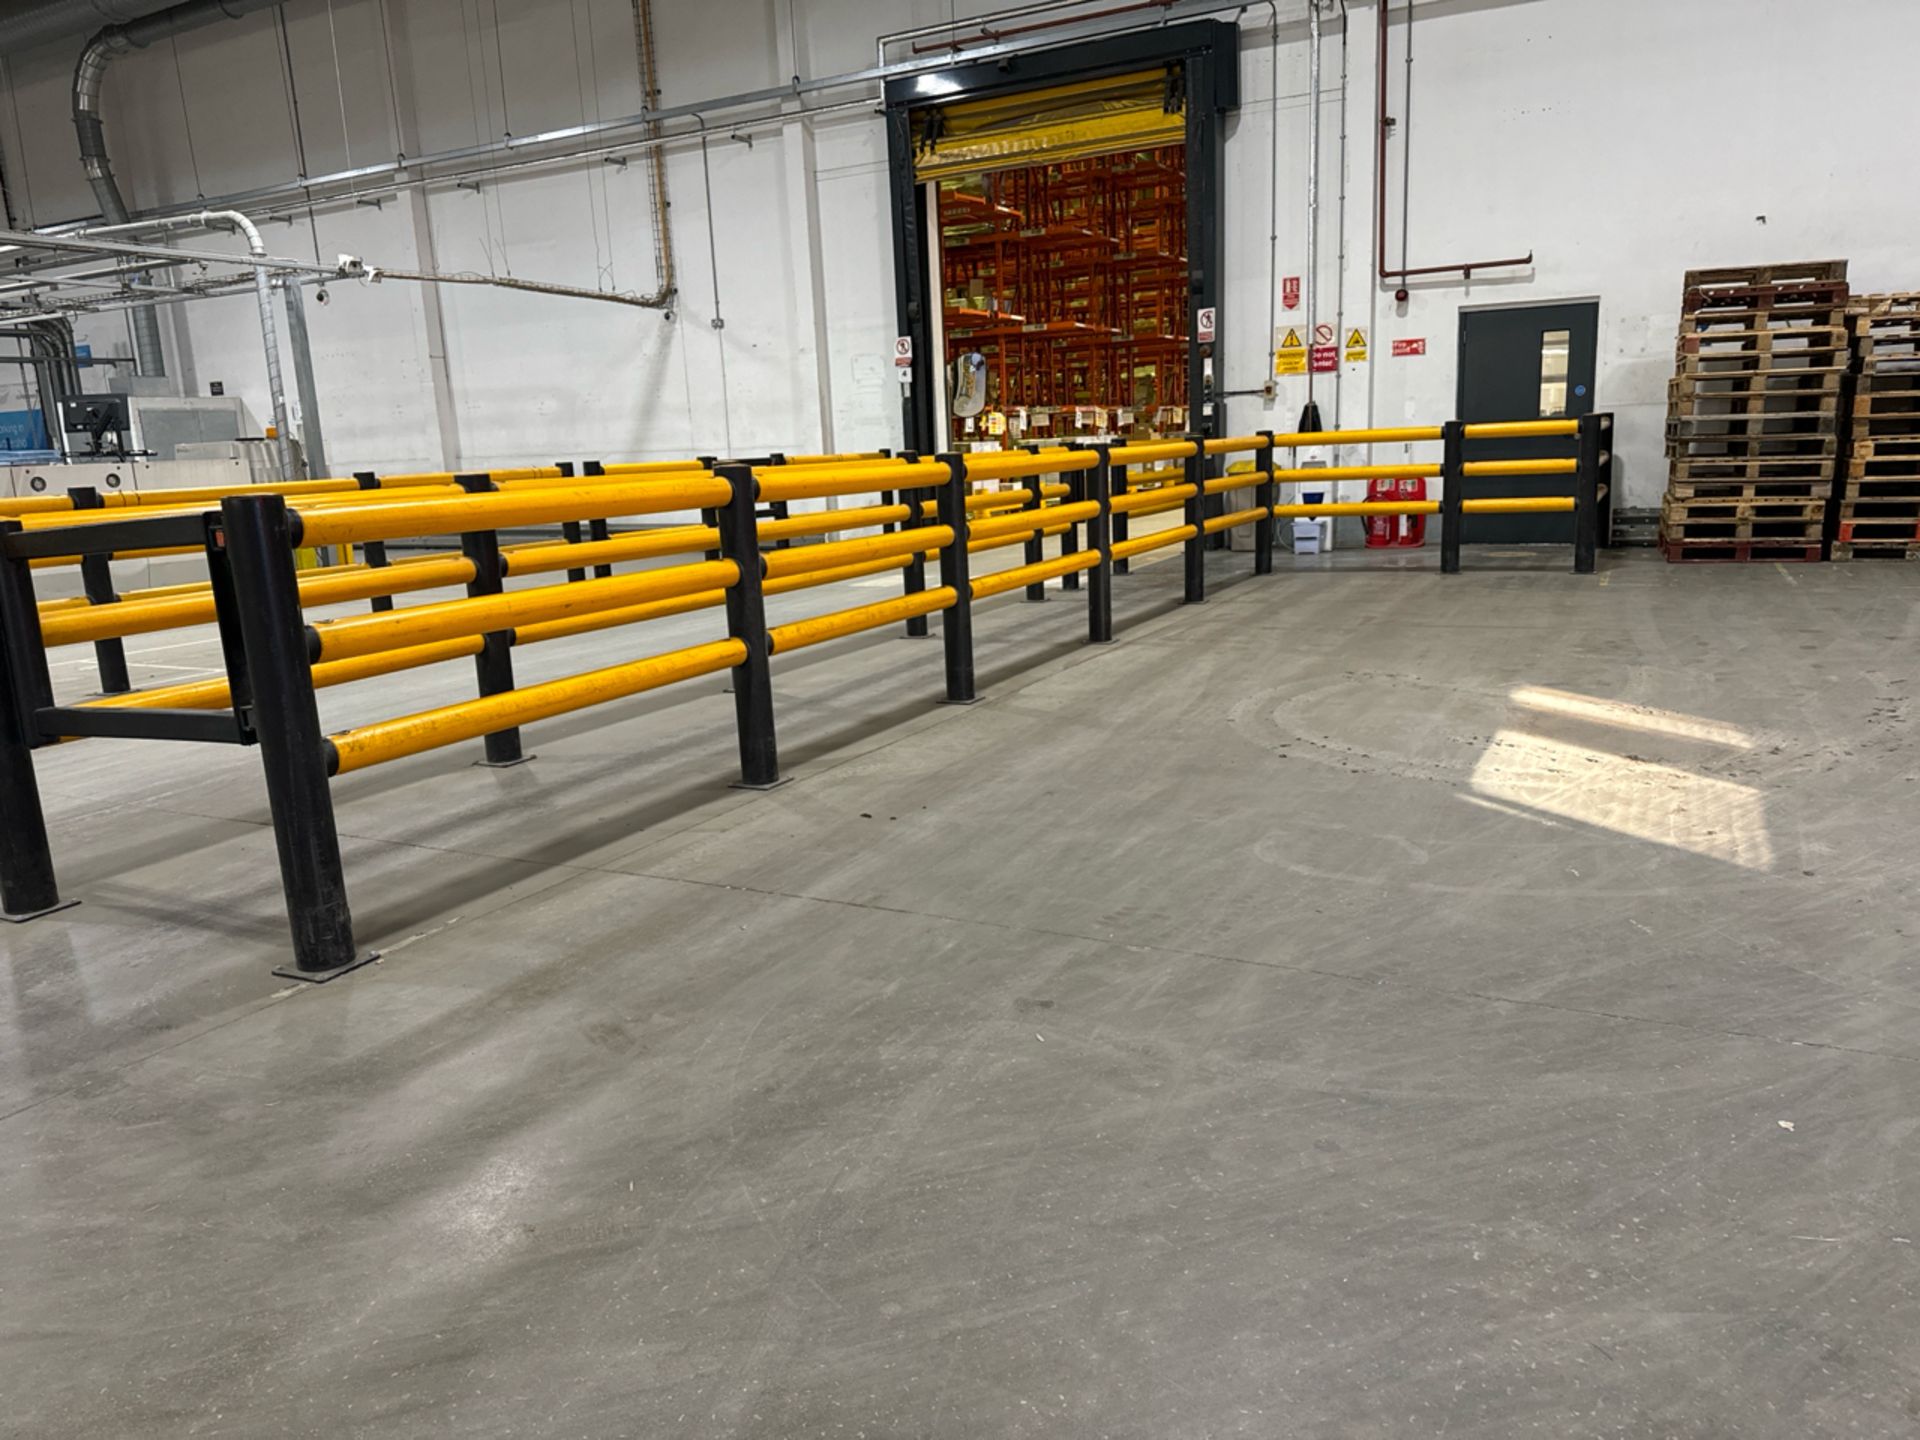 A-Safe Safety Barrier With Gate Yellow & Black Pla